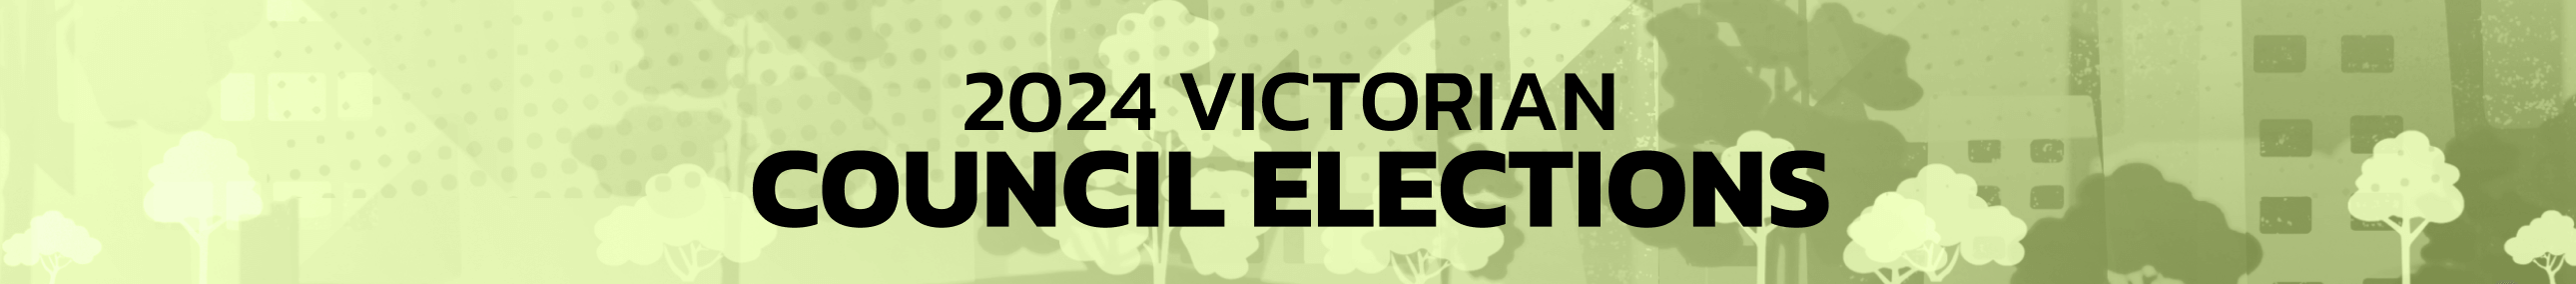 2024 Victorian Council Elections